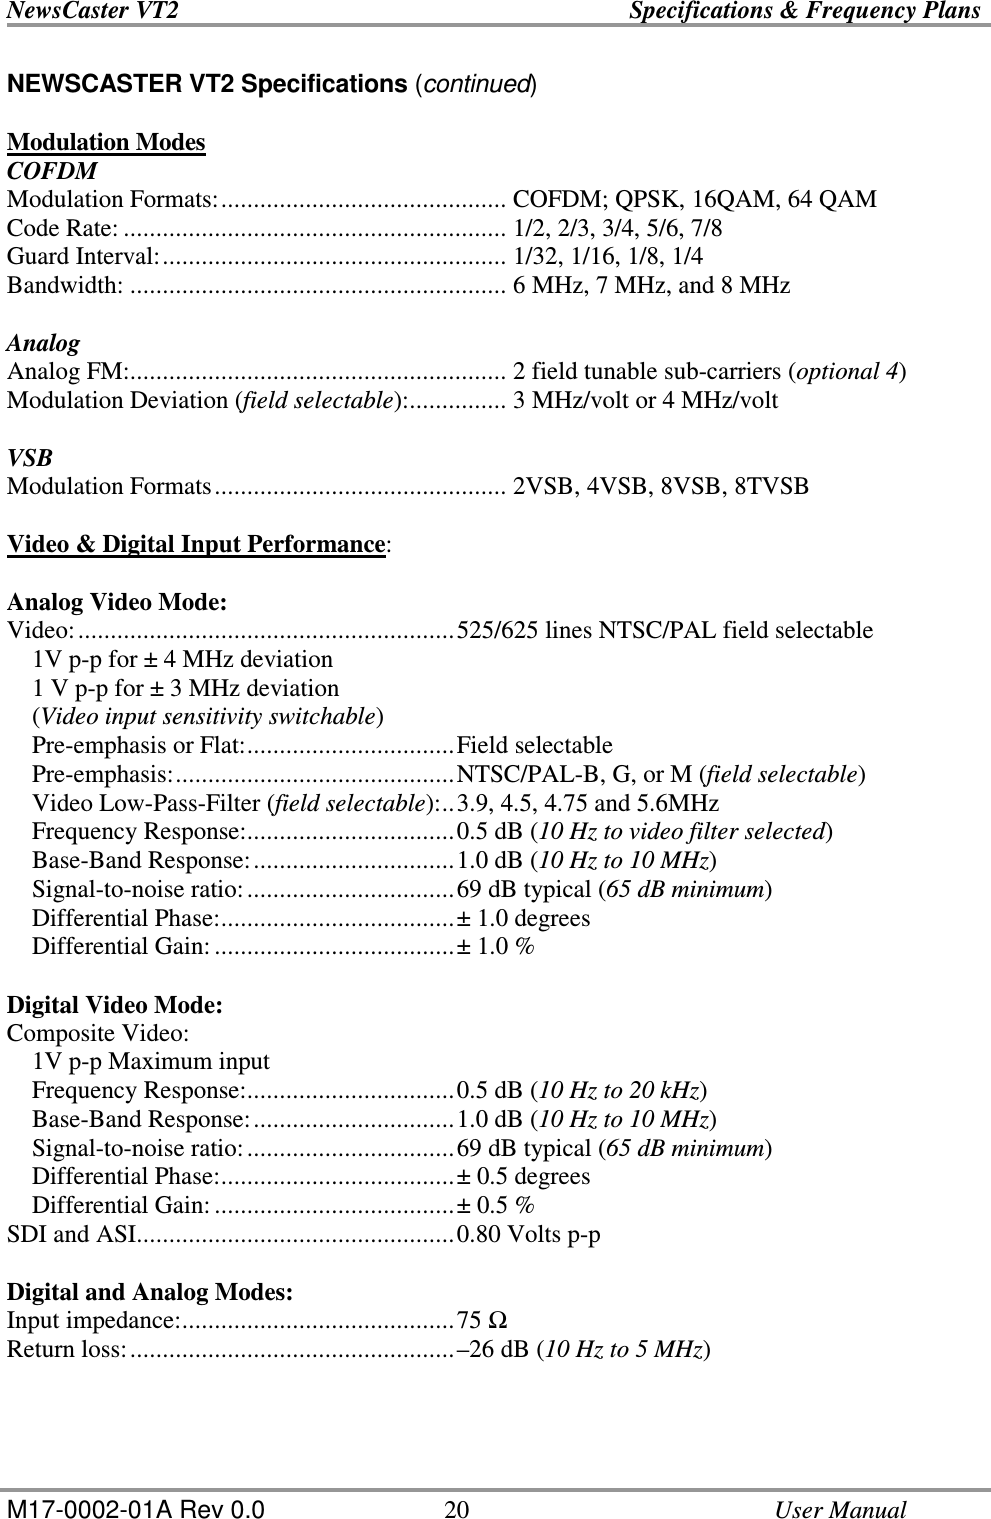 NewsCaster VT2    Specifications &amp; Frequency Plans  M17-0002-01A Rev 0.0  20    User Manual NEWSCASTER VT2 Specifications (continued)  Modulation Modes COFDM Modulation Formats:............................................ COFDM; QPSK, 16QAM, 64 QAM Code Rate: ........................................................... 1/2, 2/3, 3/4, 5/6, 7/8 Guard Interval:..................................................... 1/32, 1/16, 1/8, 1/4  Bandwidth: .......................................................... 6 MHz, 7 MHz, and 8 MHz    Analog Analog FM:.......................................................... 2 field tunable sub-carriers (optional 4) Modulation Deviation (field selectable):............... 3 MHz/volt or 4 MHz/volt  VSB Modulation Formats............................................. 2VSB, 4VSB, 8VSB, 8TVSB  Video &amp; Digital Input Performance:  Analog Video Mode: Video:..........................................................525/625 lines NTSC/PAL field selectable     1V p-p for ± 4 MHz deviation     1 V p-p for ± 3 MHz deviation     (Video input sensitivity switchable)     Pre-emphasis or Flat:................................Field selectable     Pre-emphasis:...........................................NTSC/PAL-B, G, or M (field selectable)     Video Low-Pass-Filter (field selectable):..3.9, 4.5, 4.75 and 5.6MHz     Frequency Response:................................0.5 dB (10 Hz to video filter selected)     Base-Band Response:...............................1.0 dB (10 Hz to 10 MHz)     Signal-to-noise ratio:................................69 dB typical (65 dB minimum)     Differential Phase:....................................± 1.0 degrees     Differential Gain:.....................................± 1.0 %  Digital Video Mode: Composite Video:     1V p-p Maximum input     Frequency Response:................................0.5 dB (10 Hz to 20 kHz)     Base-Band Response:...............................1.0 dB (10 Hz to 10 MHz)     Signal-to-noise ratio:................................69 dB typical (65 dB minimum)     Differential Phase:....................................± 0.5 degrees     Differential Gain:.....................................± 0.5 % SDI and ASI.................................................0.80 Volts p-p  Digital and Analog Modes: Input impedance:..........................................75  Return loss:..................................................–26 dB (10 Hz to 5 MHz) 